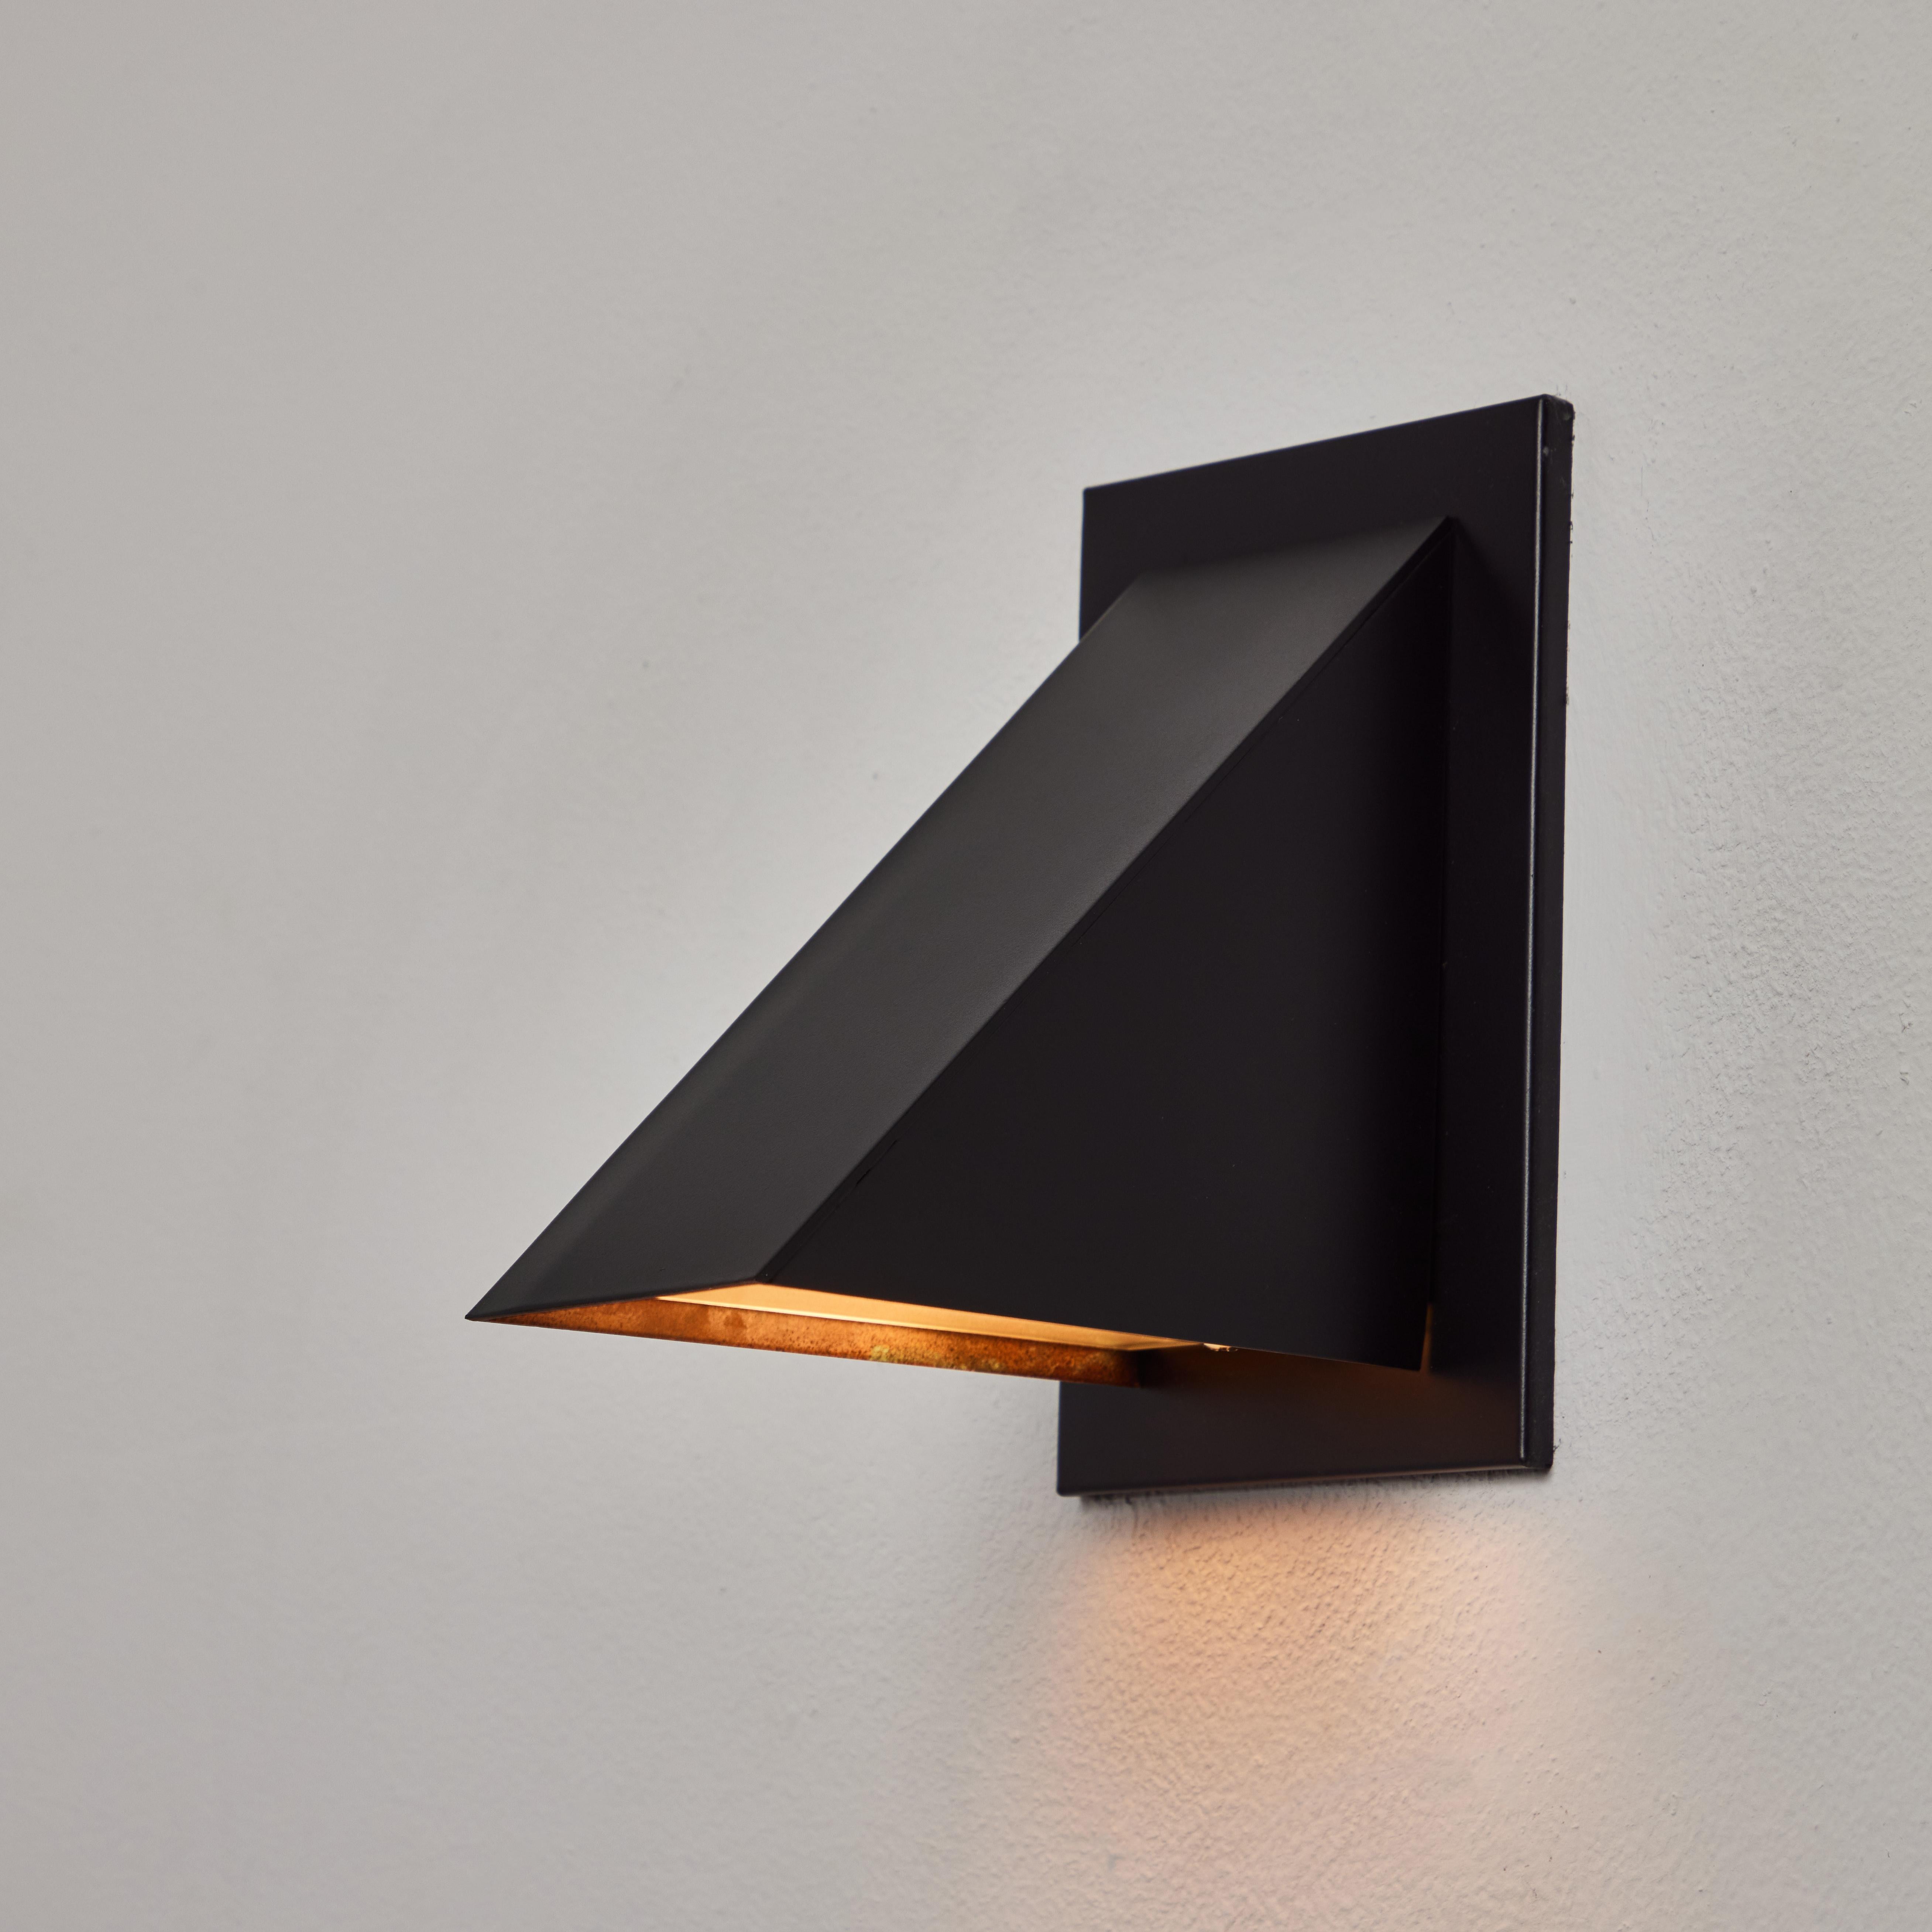 Jonas Bohlin 'Oxid' Wall Light for Örsjö in Black. Executed in black painted metal with an opaline glass diffuser. An incredibly refined and clean geometric design that is quintessentially Scandinavian. For indoor or outdoor use.

Price is per item.